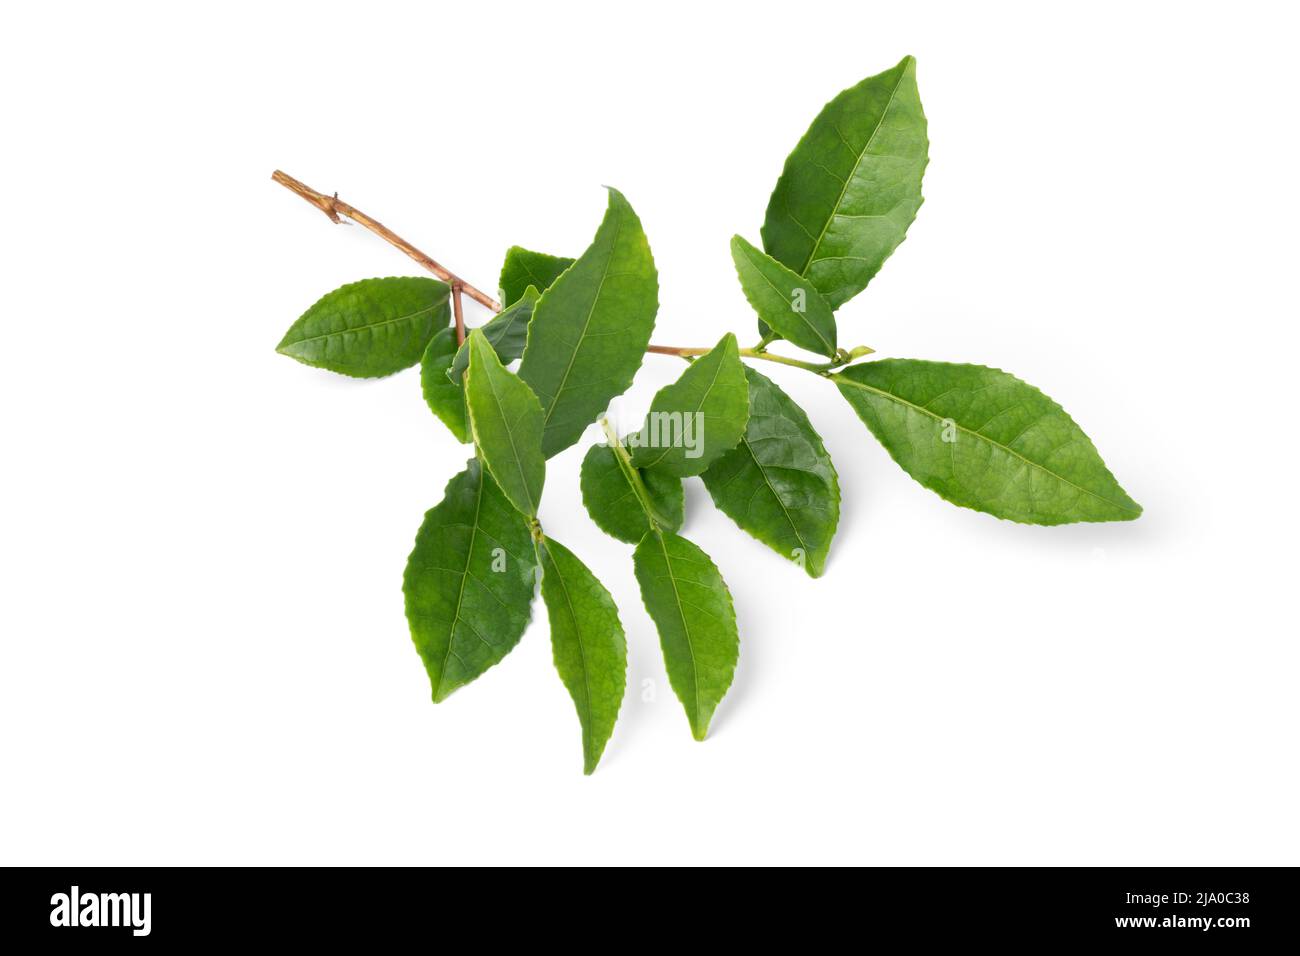 Twig of a tea plant, Camellia sinensis, isolated on white background Stock Photo